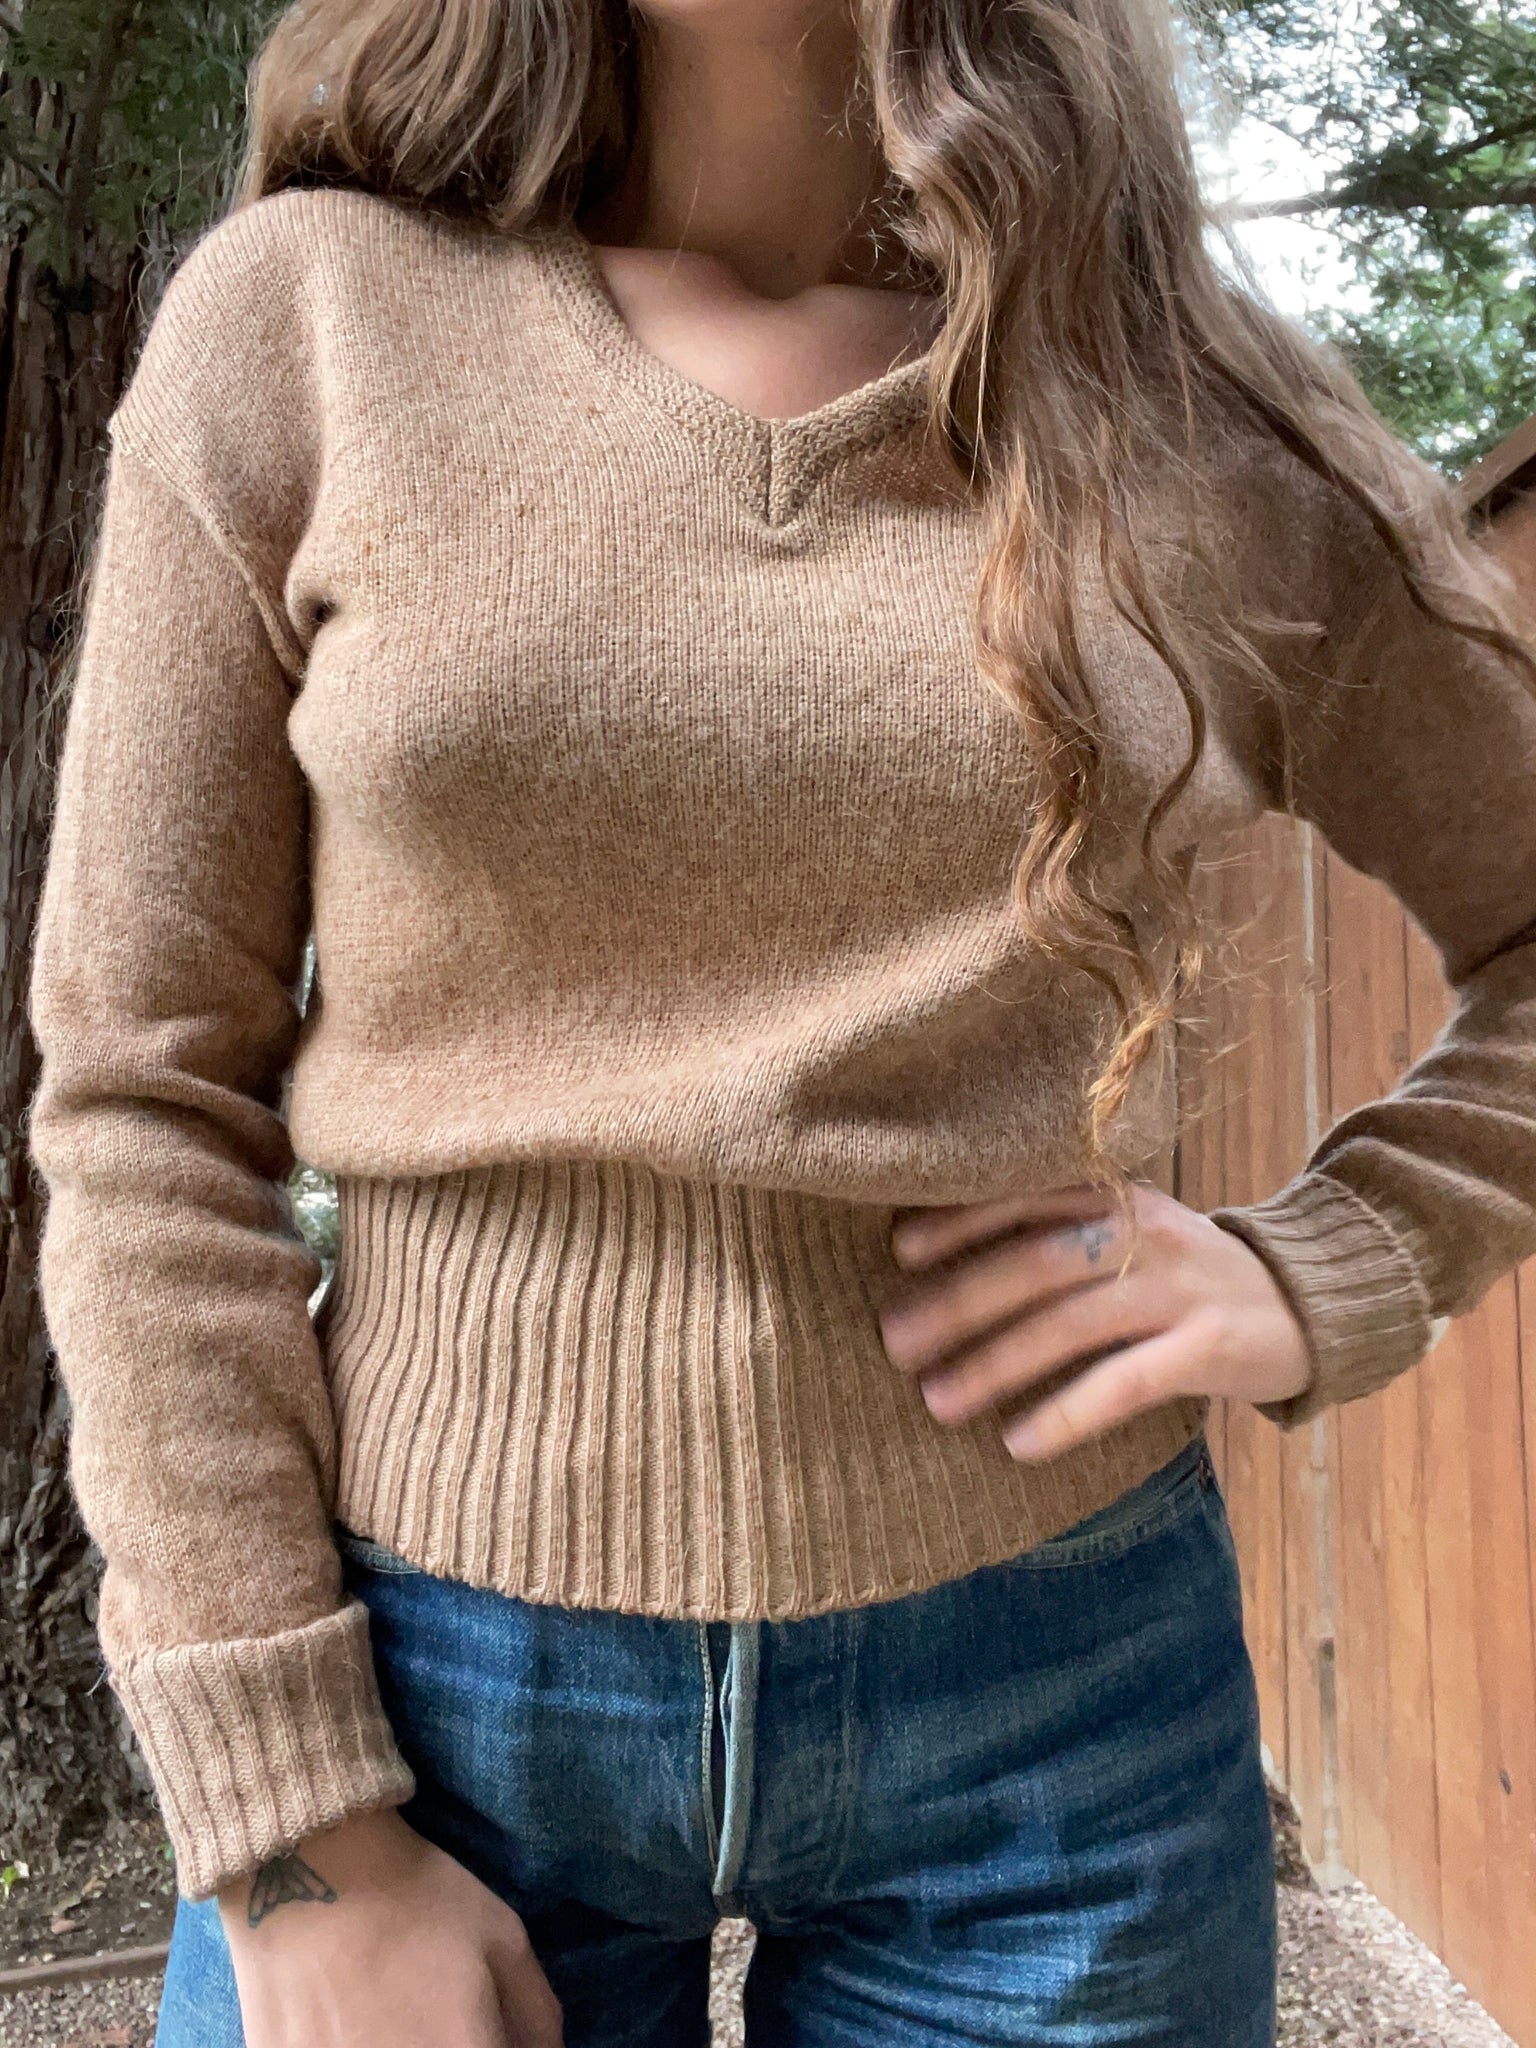 1930s Taupe Wool Knit Sweater